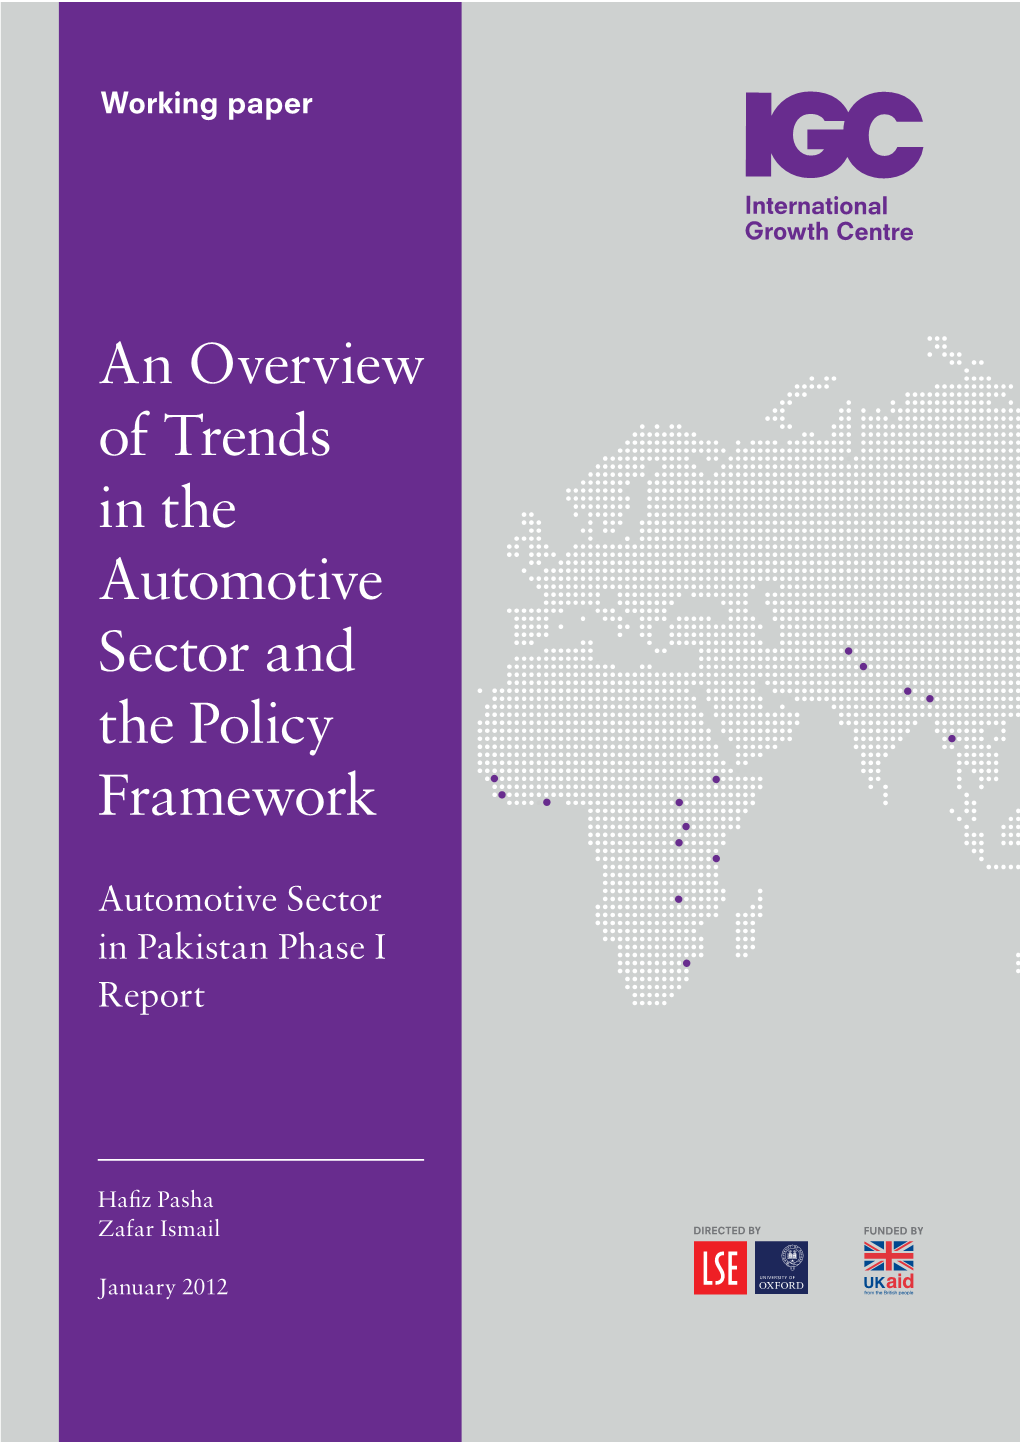 An Overview of Trends in the Automotive Sector and the Policy Framework